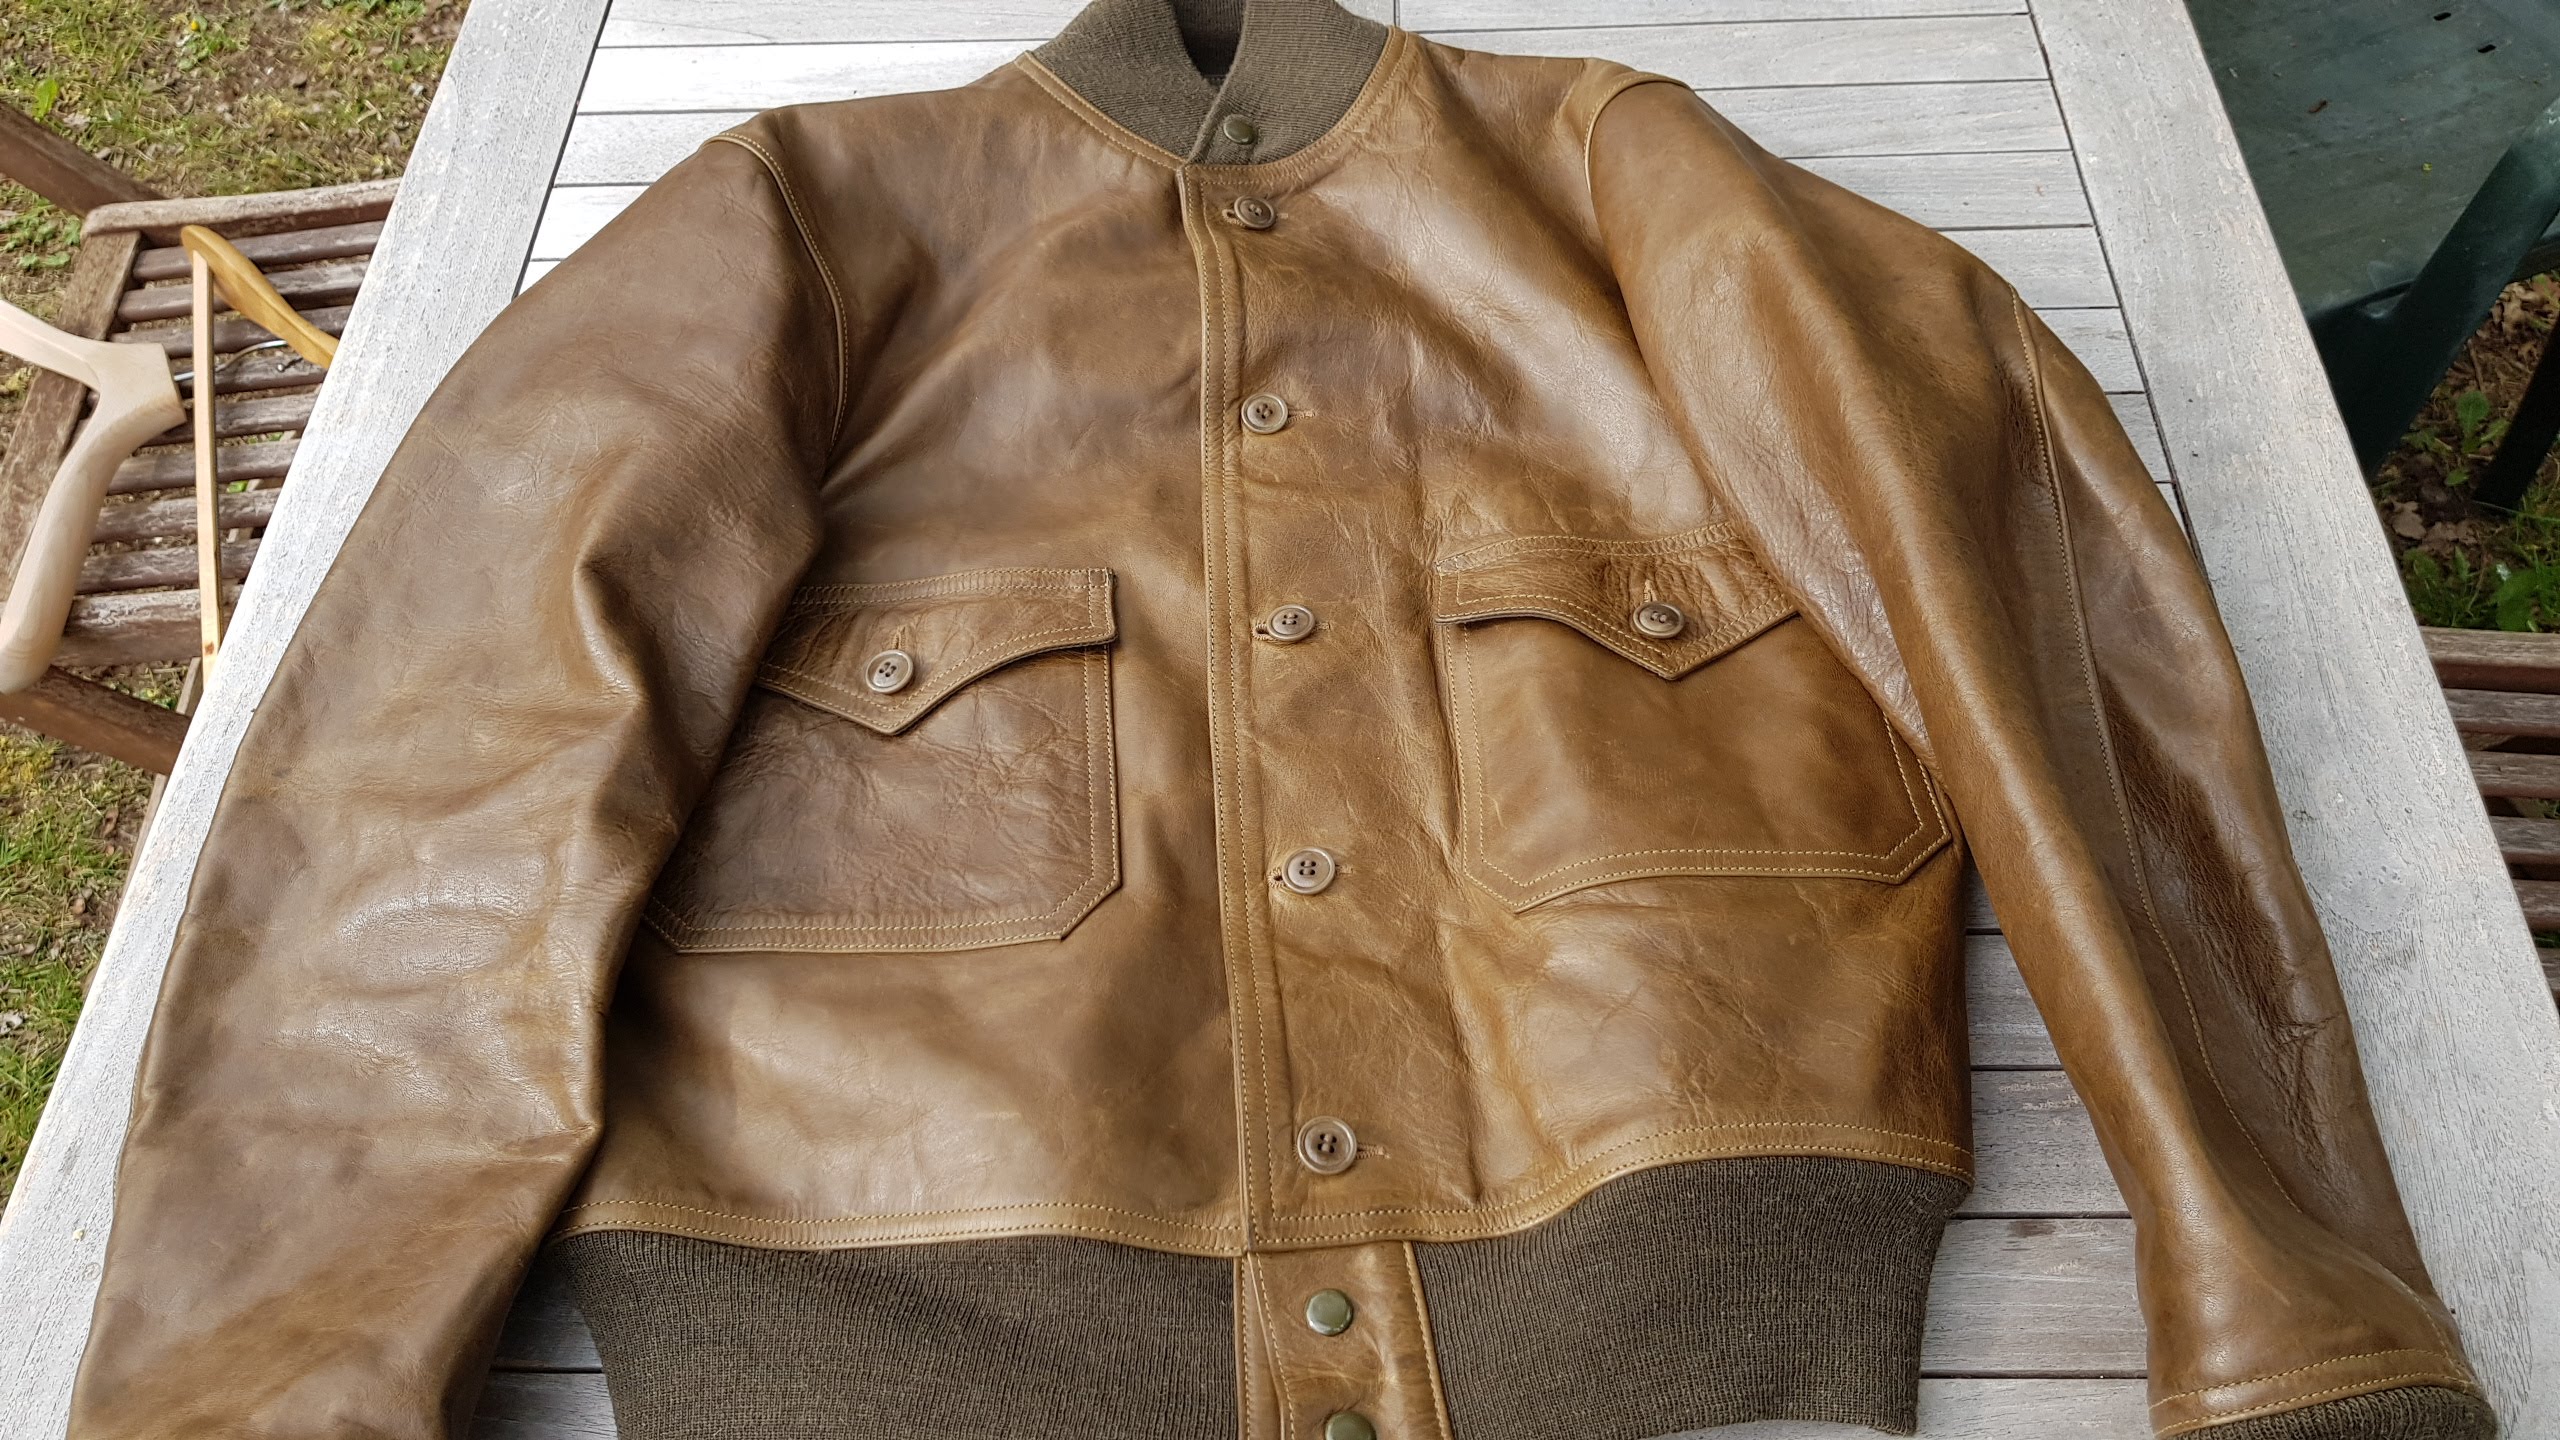 Let's see some A1's | Page 2 | Vintage Leather Jackets Forum